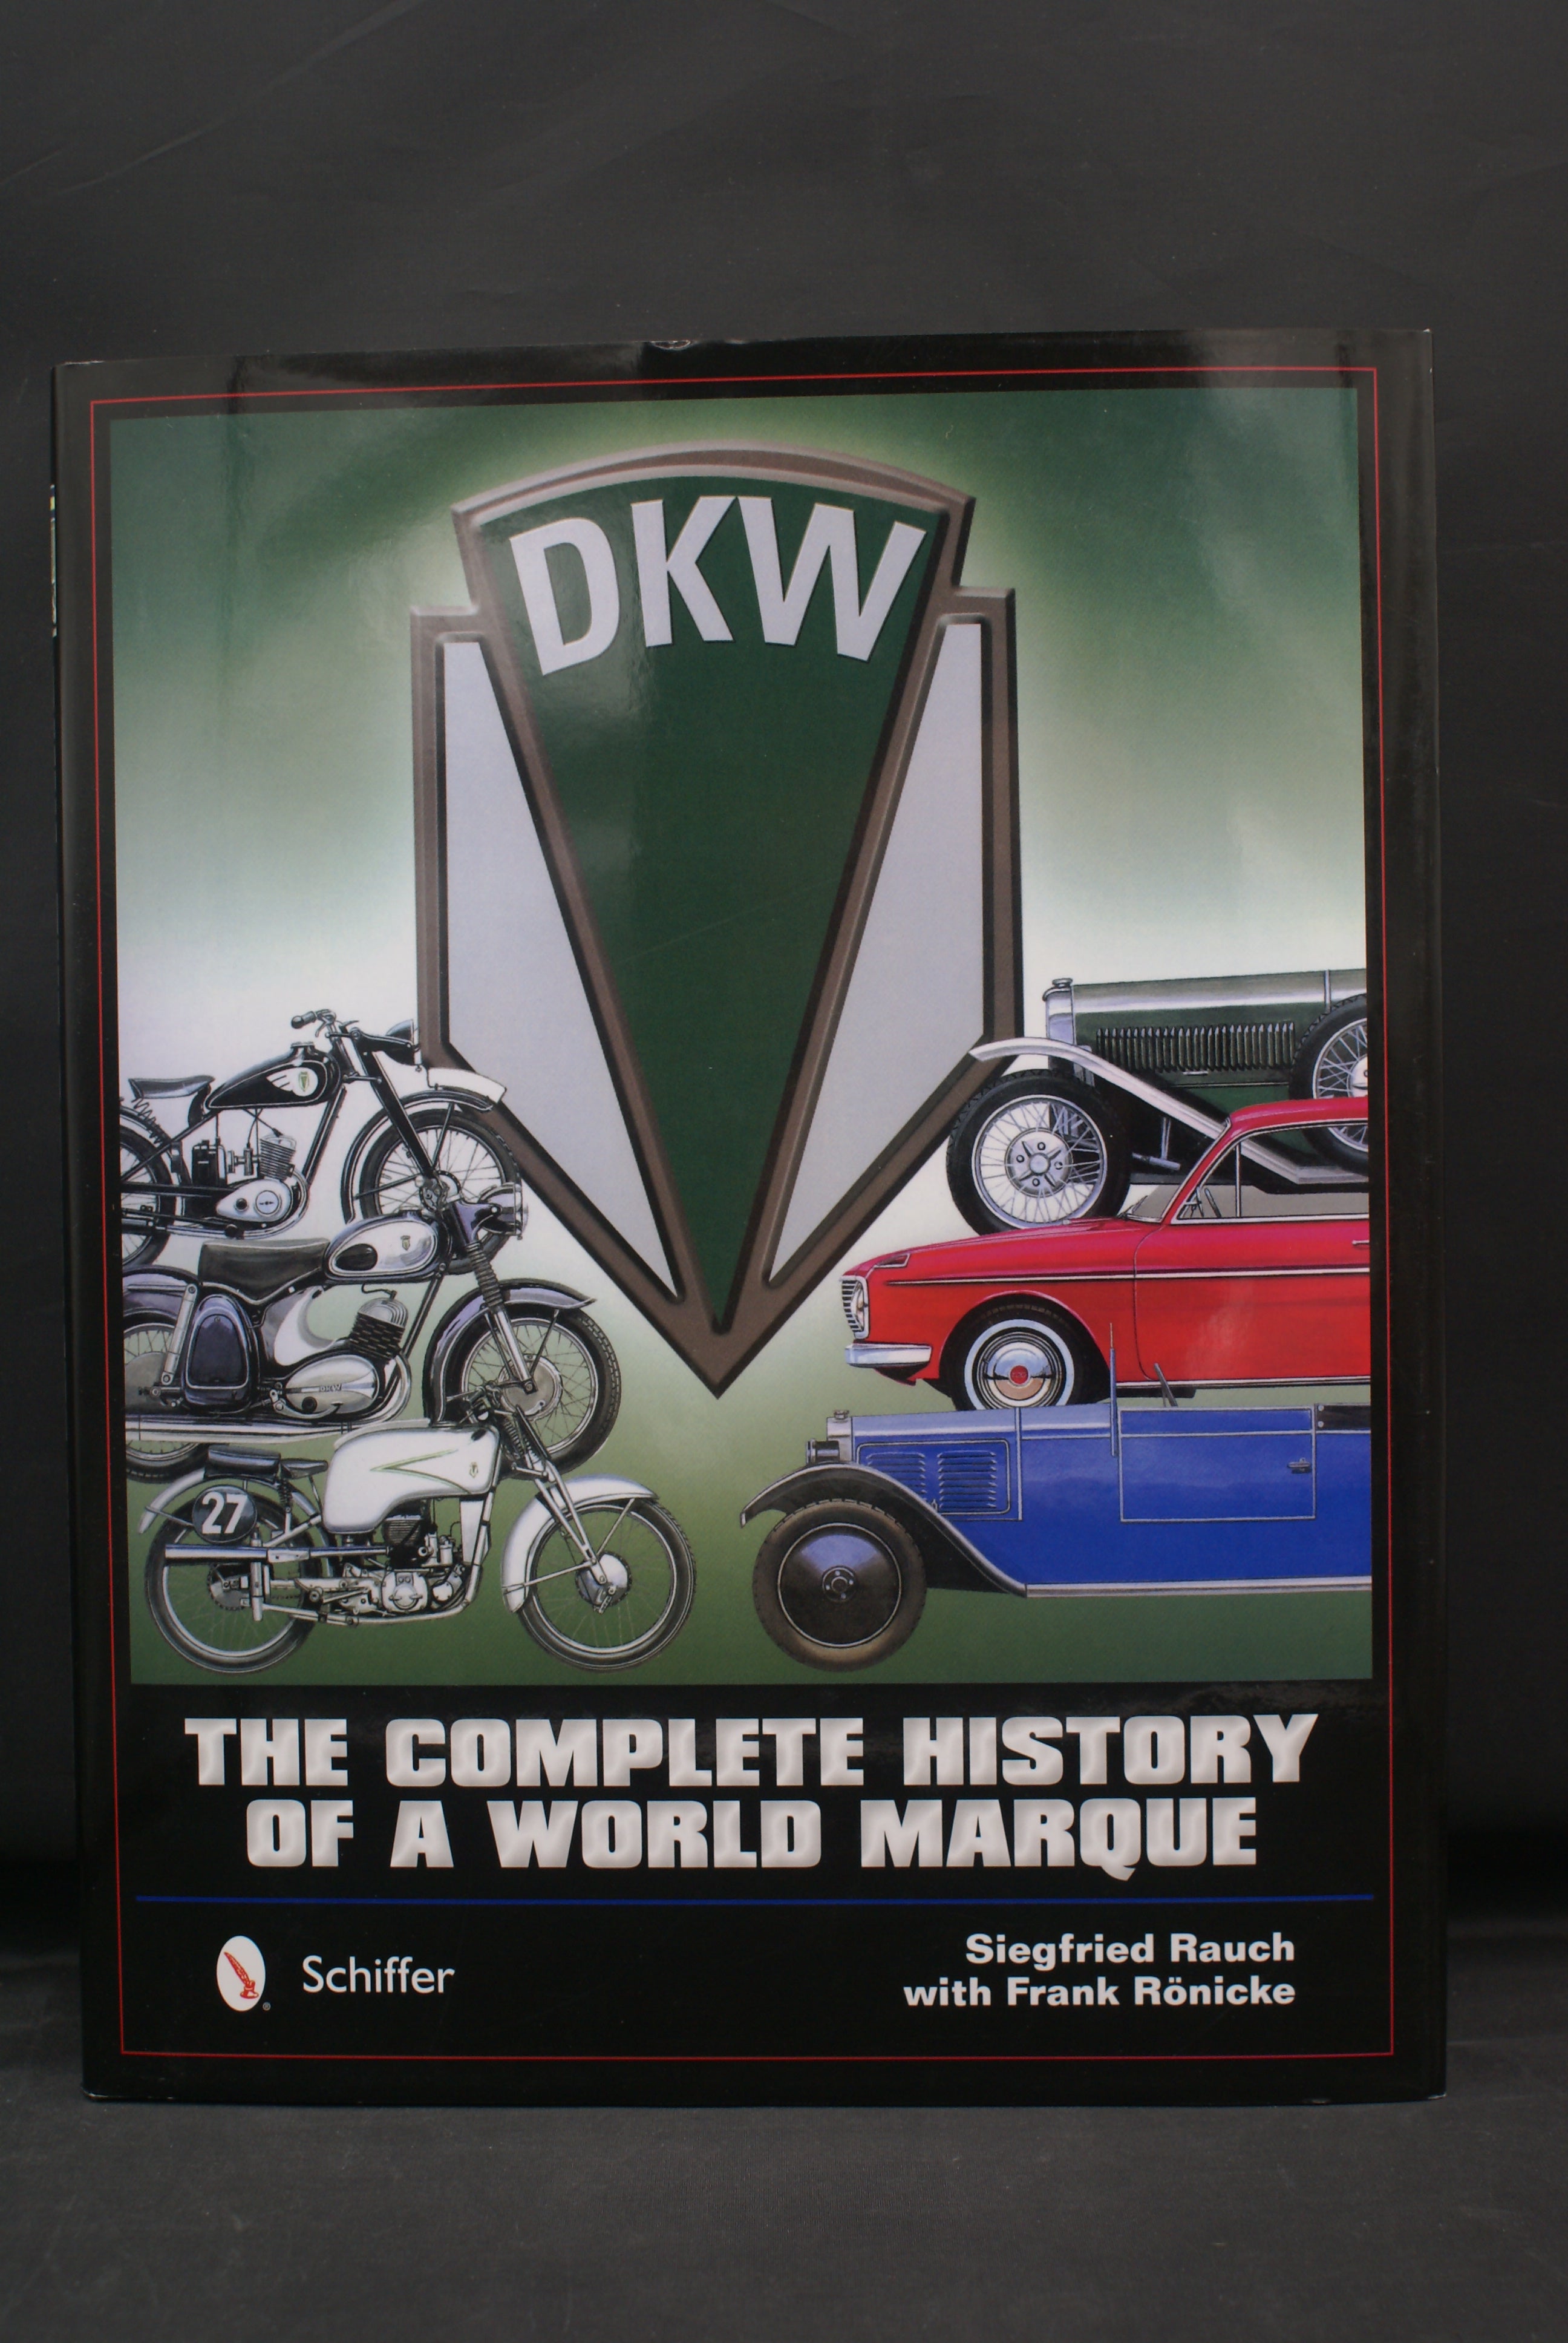 DKW, The complete history of a world marque